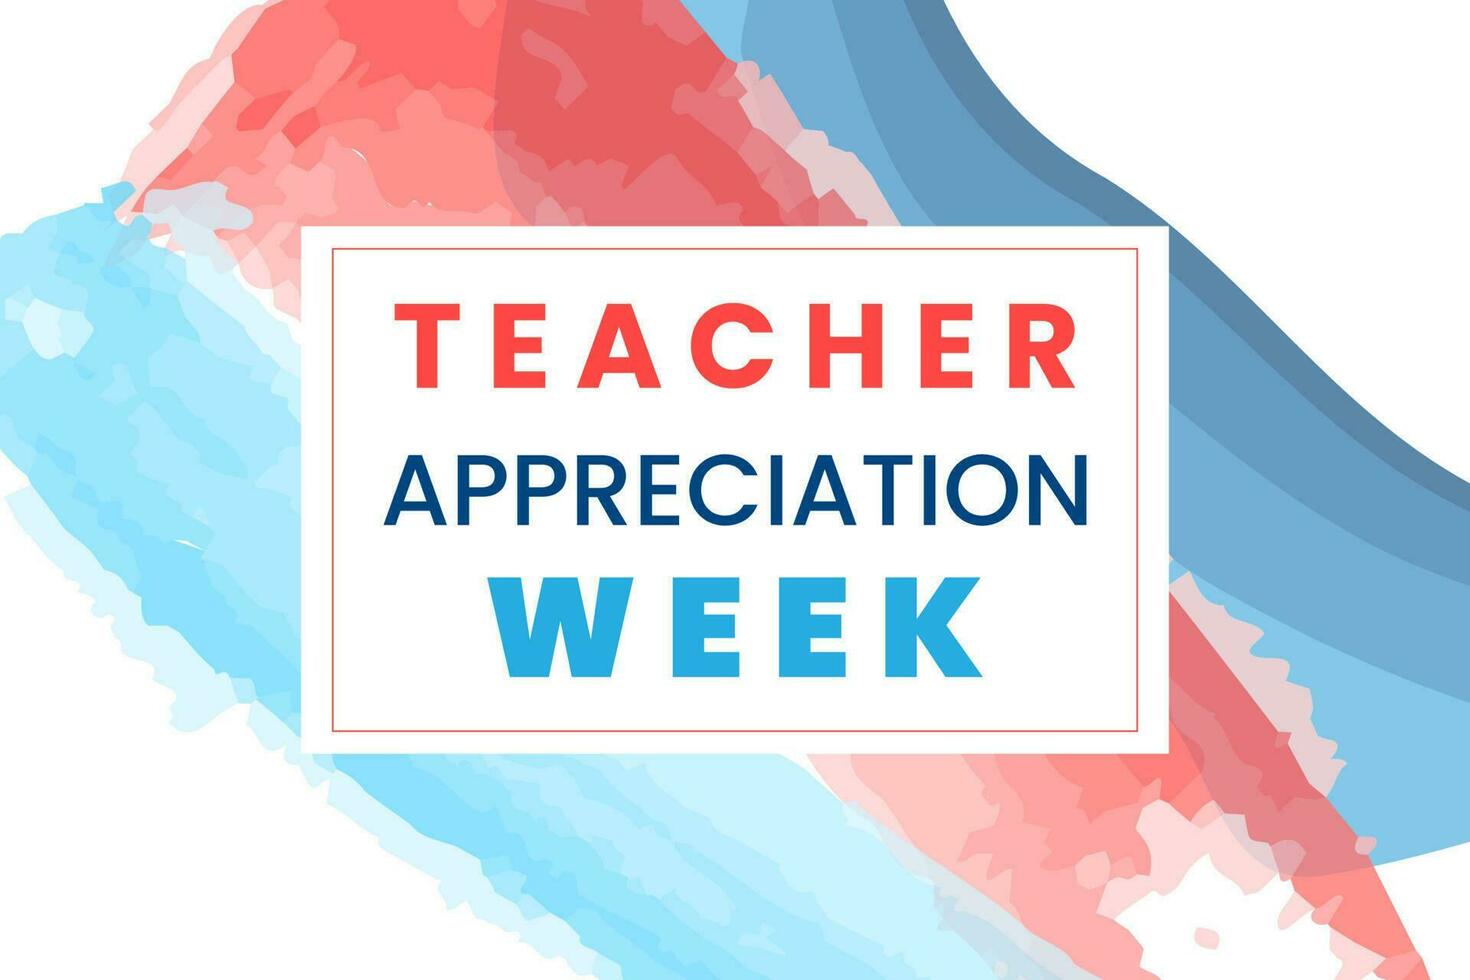 Teacher appreciation week is observed annually in May in the United States. In honour of teachers who hard work and teach our children. School and education. Vector illustration.